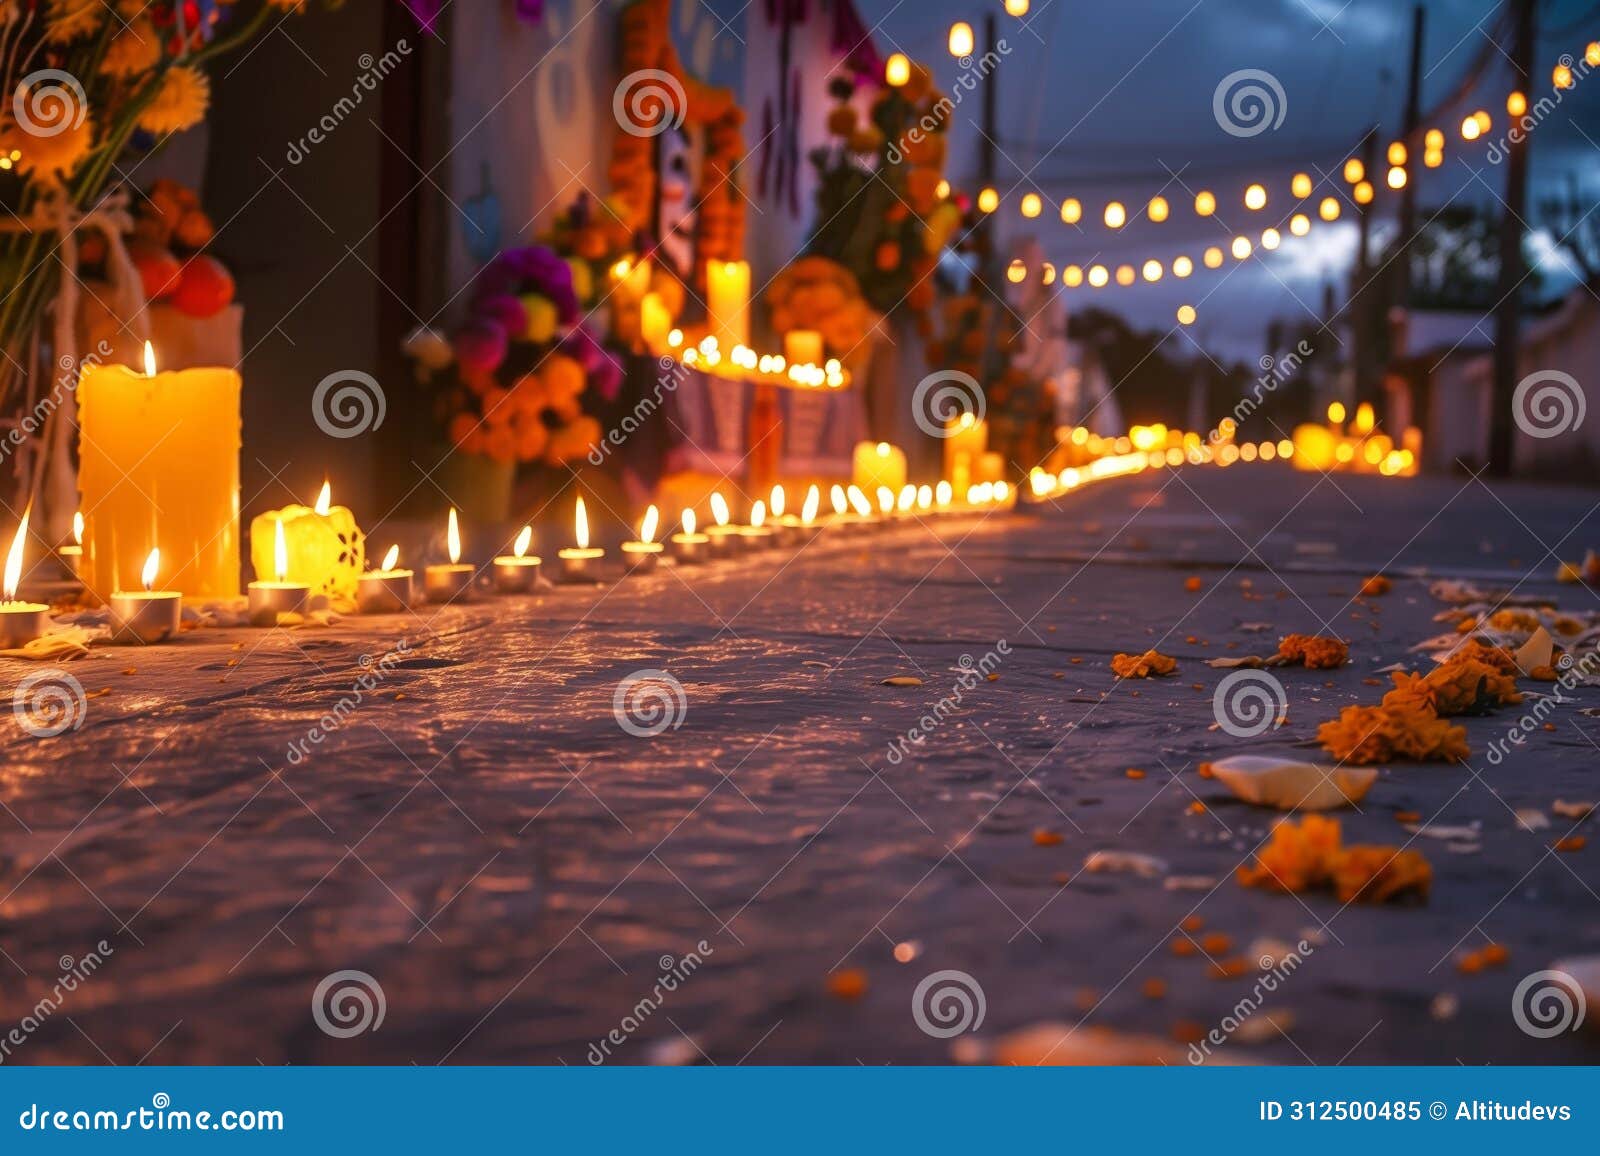 street lined with candles leading to an ofrenda at dusk